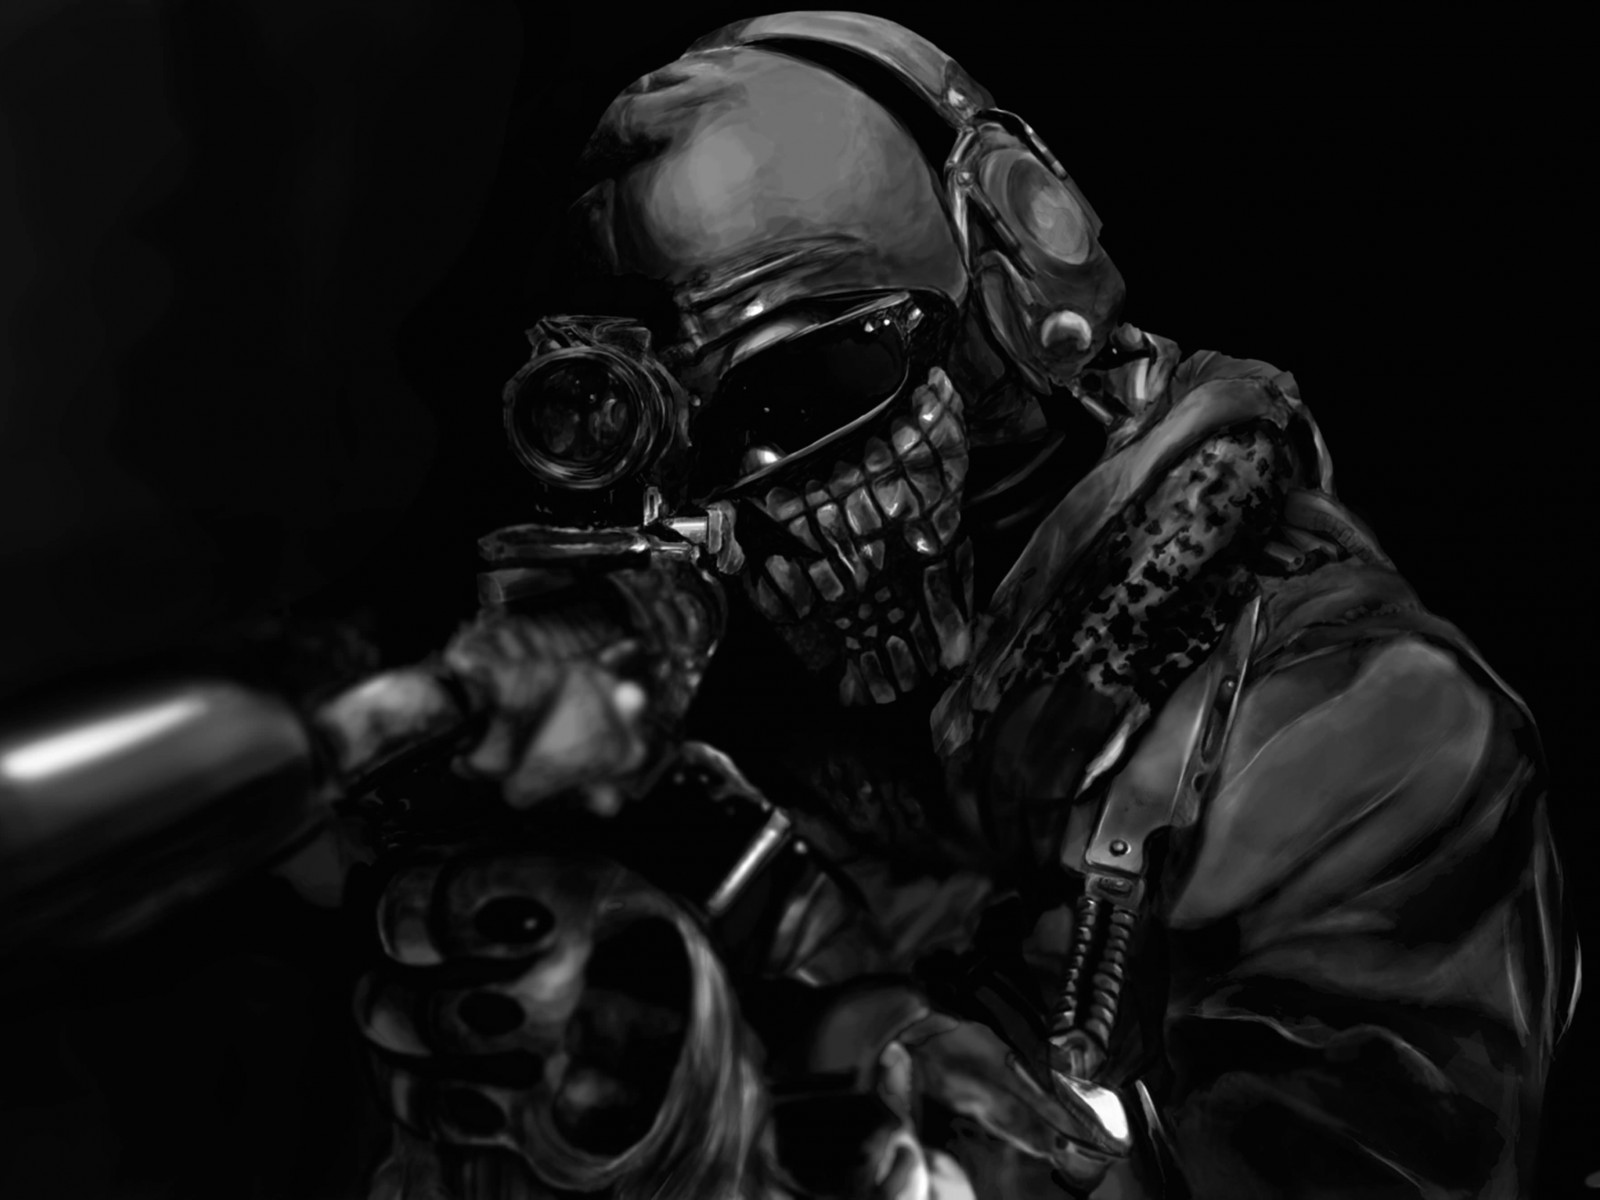 Call of Duty Ghost Masked Warrior Wallpaper for Desktop 1600x1200